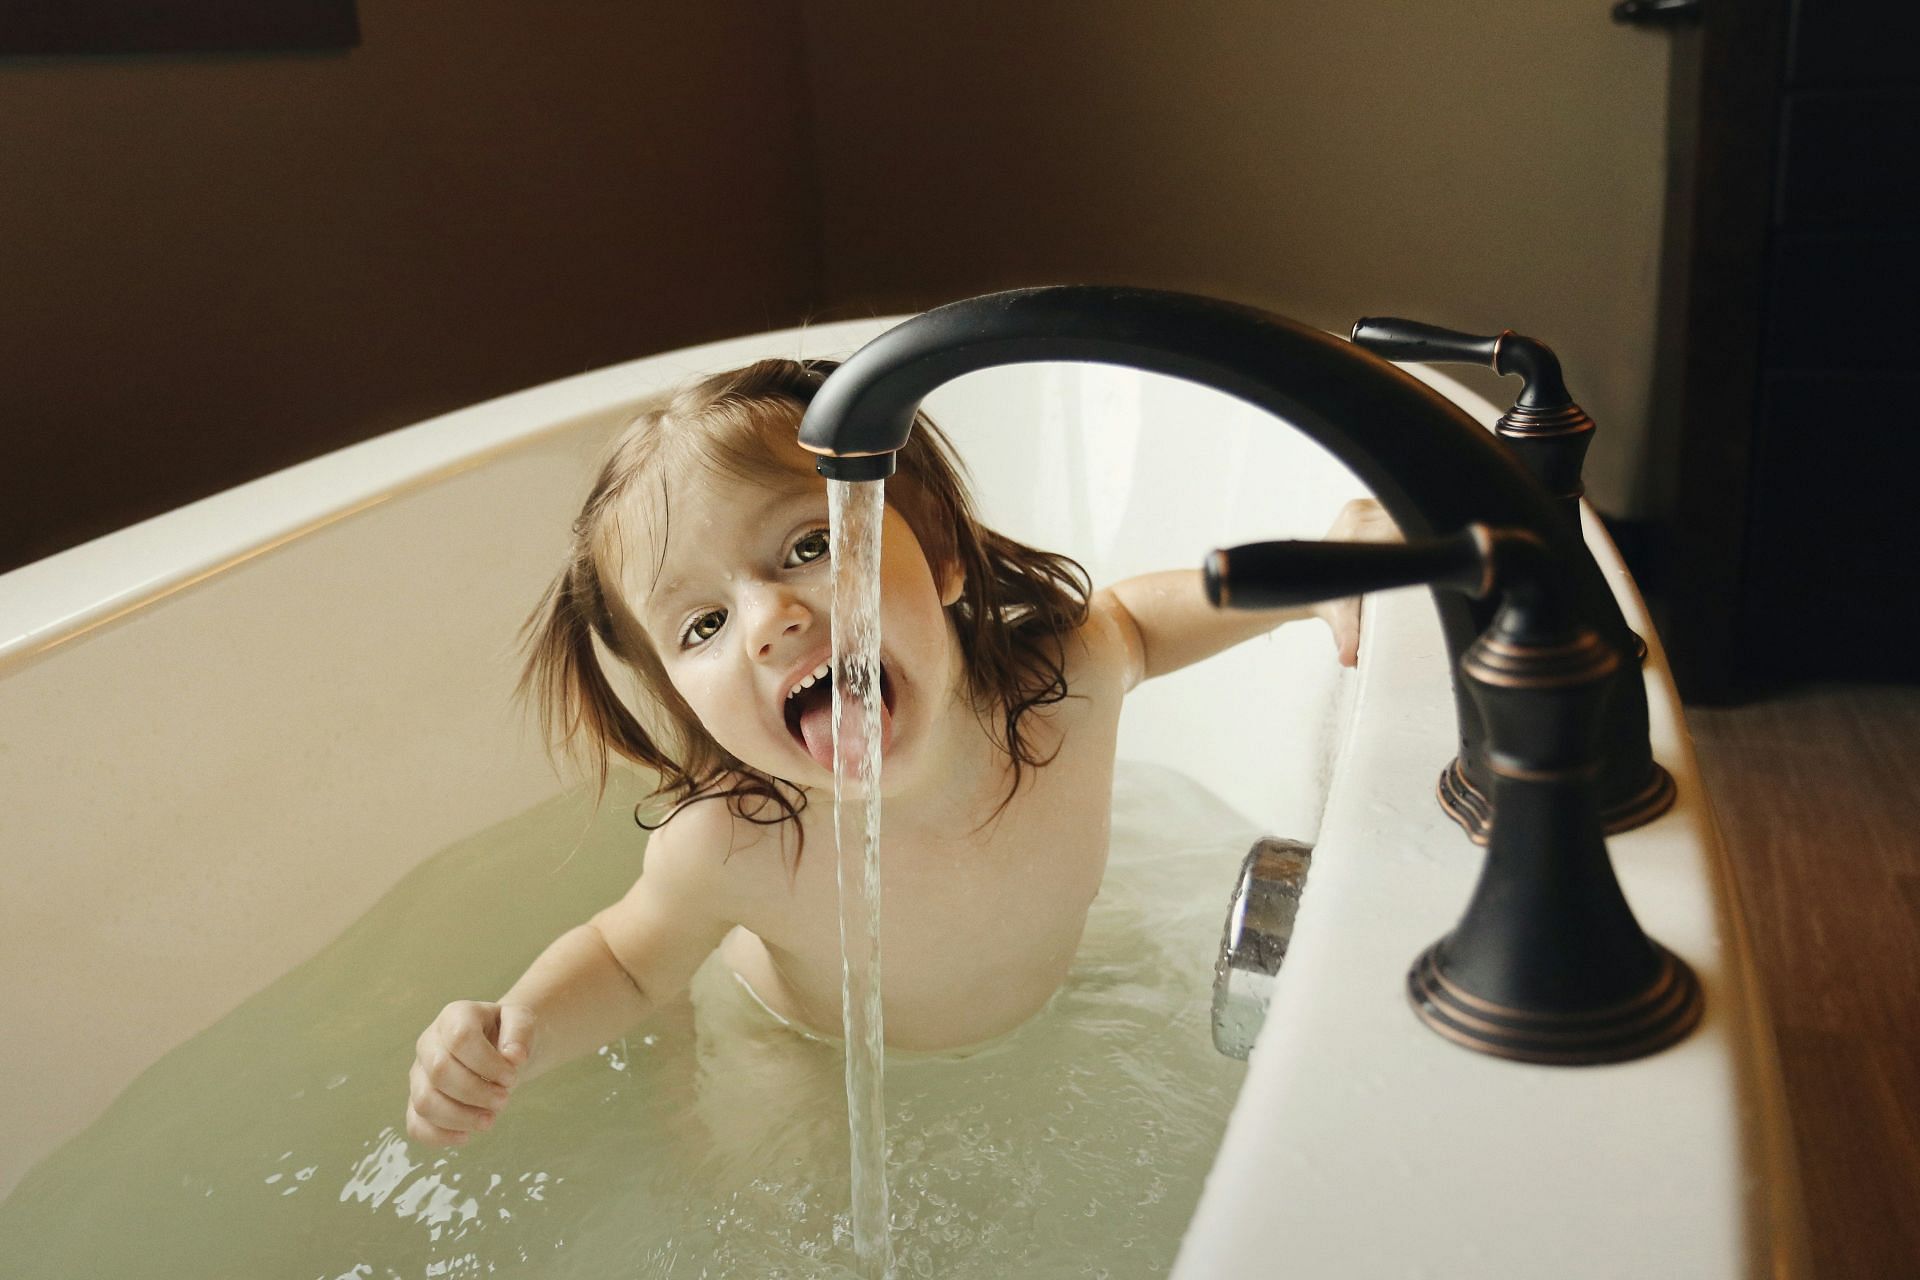 Tap water is very unsafe for babies (Image by Jen Theodore/Unsplash)